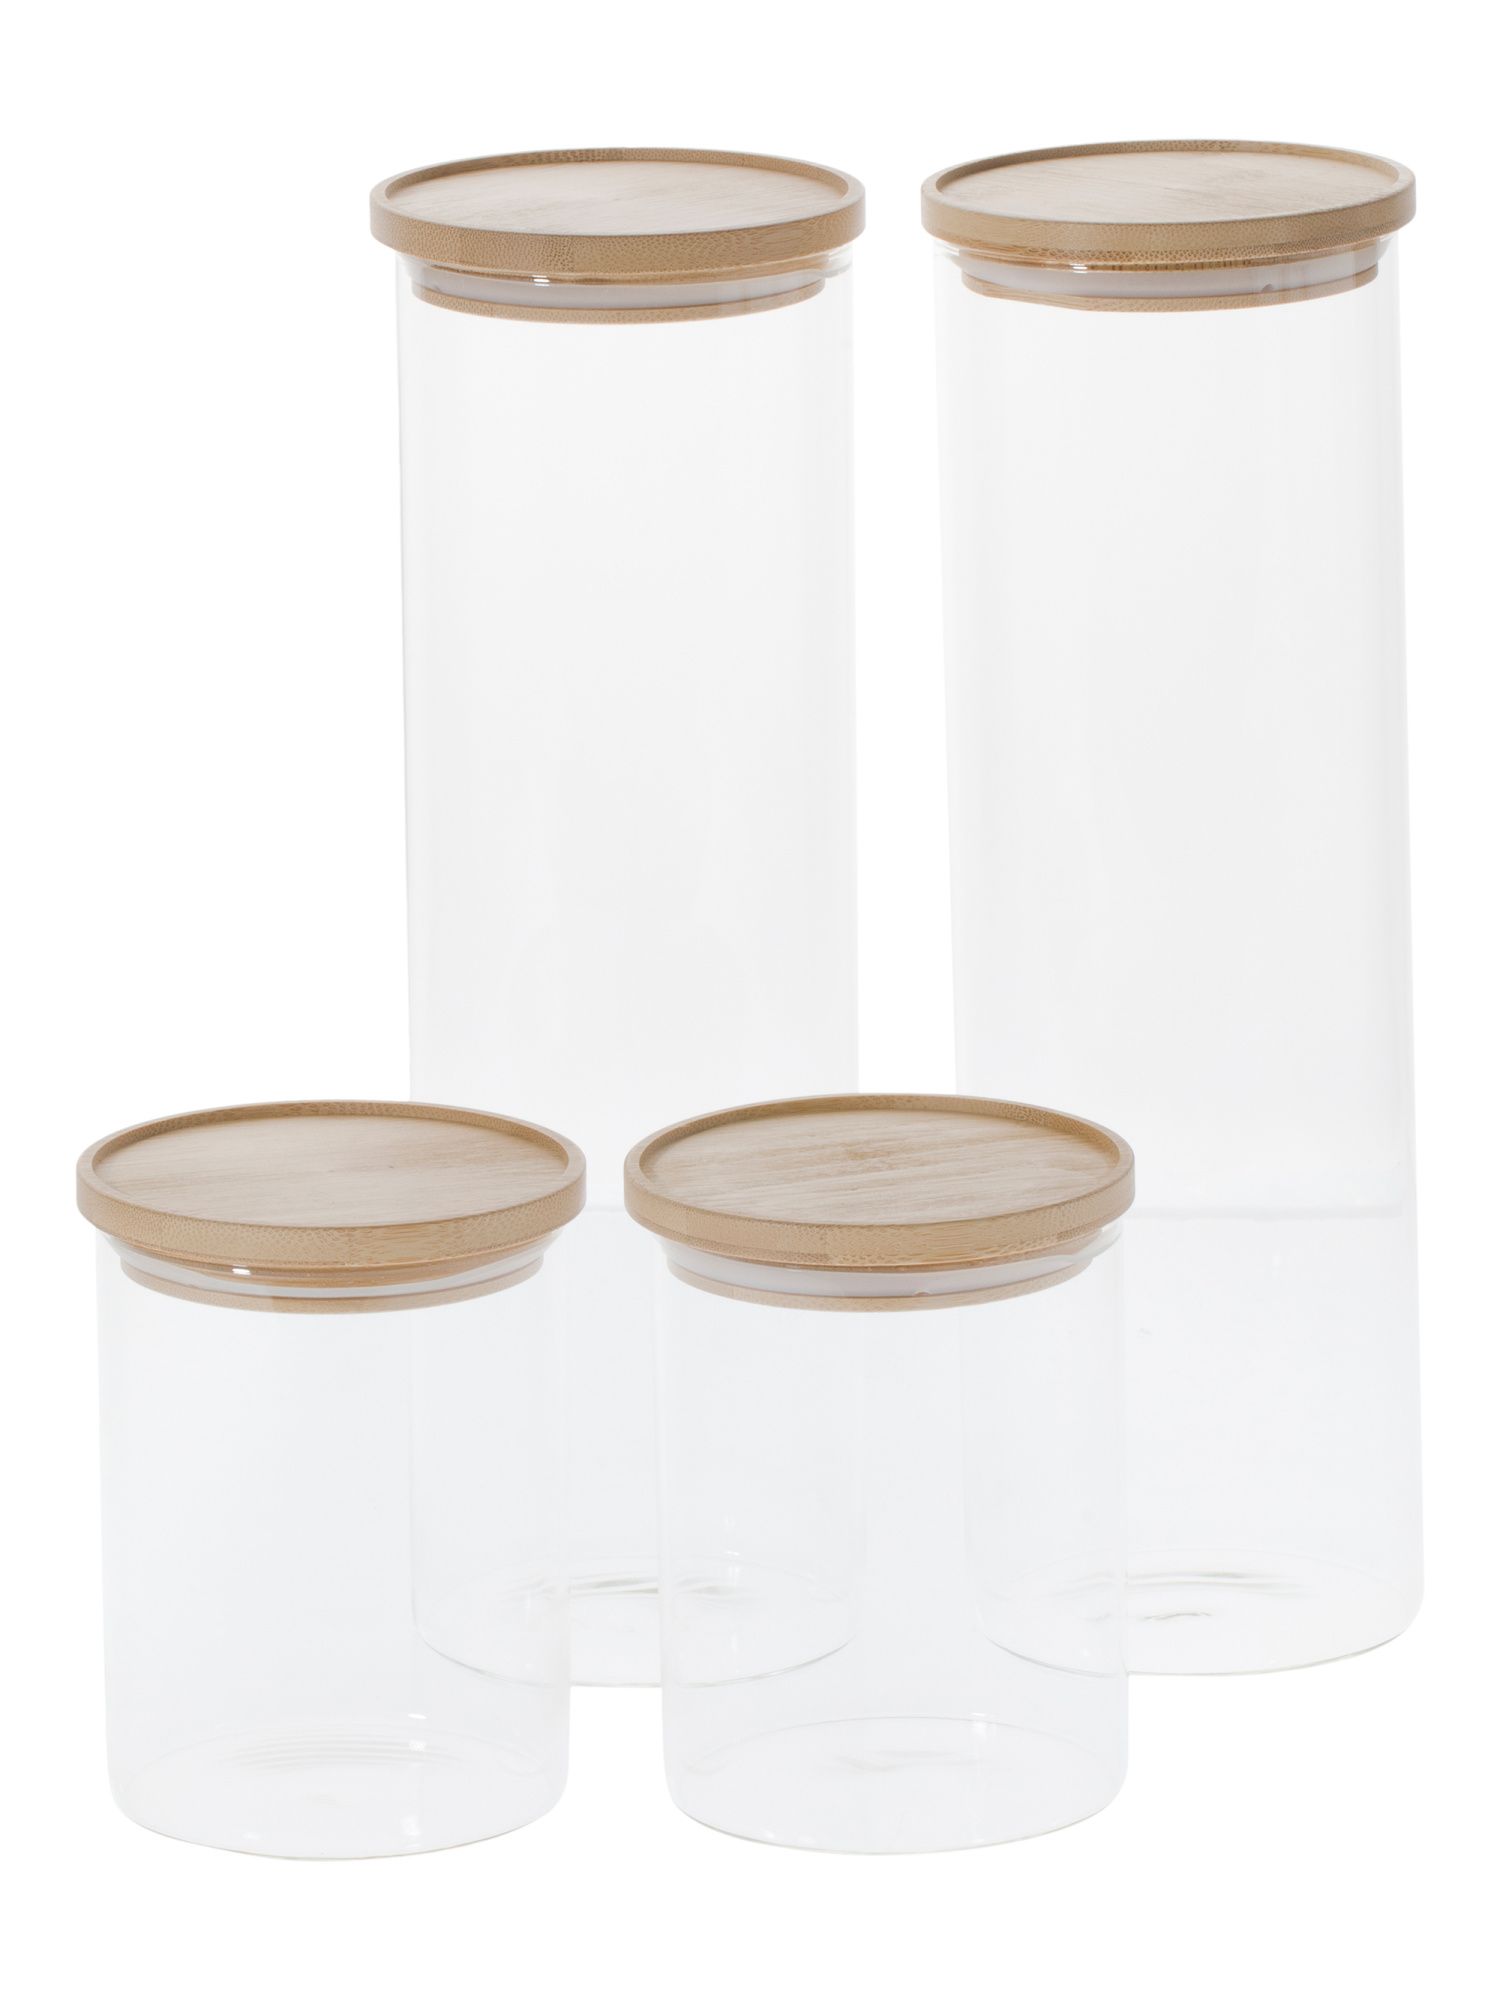 Glass Canisters Collection | TJ Maxx